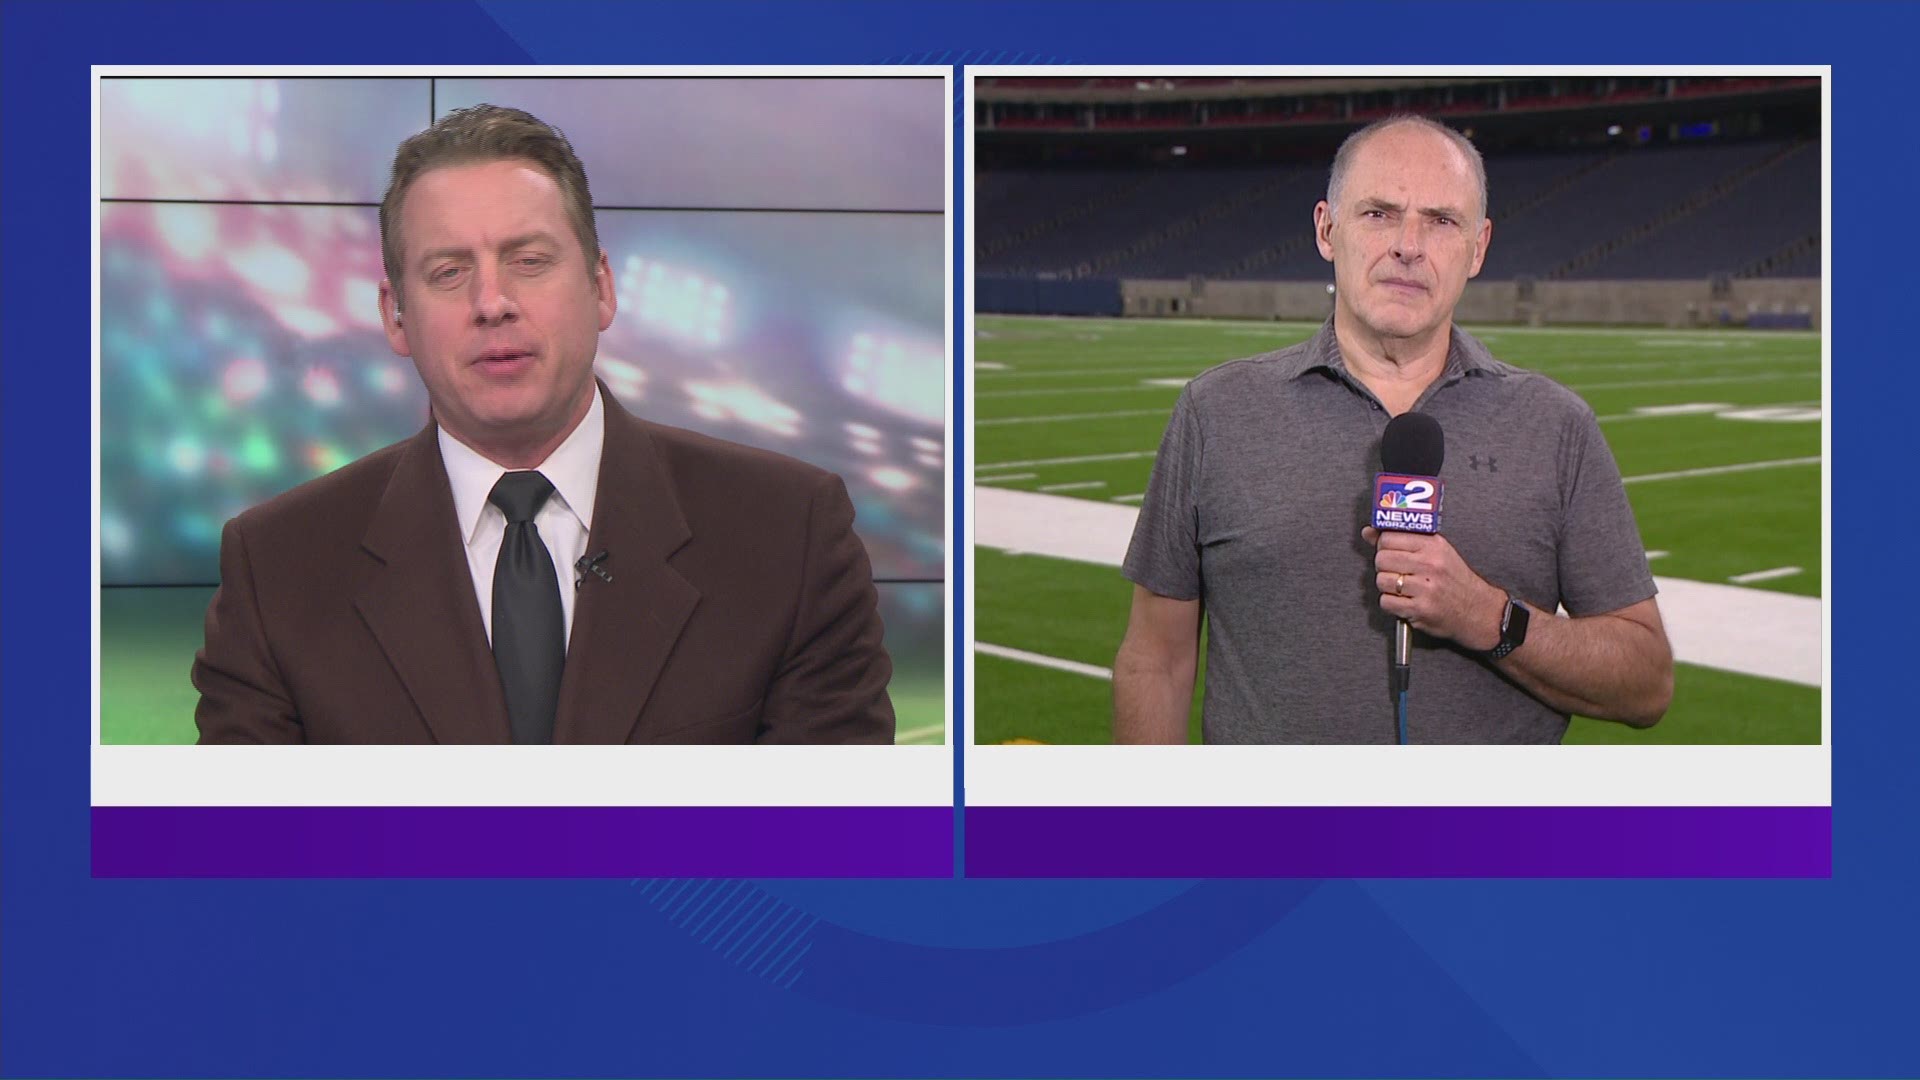 WGRZ's Adam Benigni is joined by Vic Carucci of the Buffalo News from Houston after the Bills 20-13 loss to the Texans.